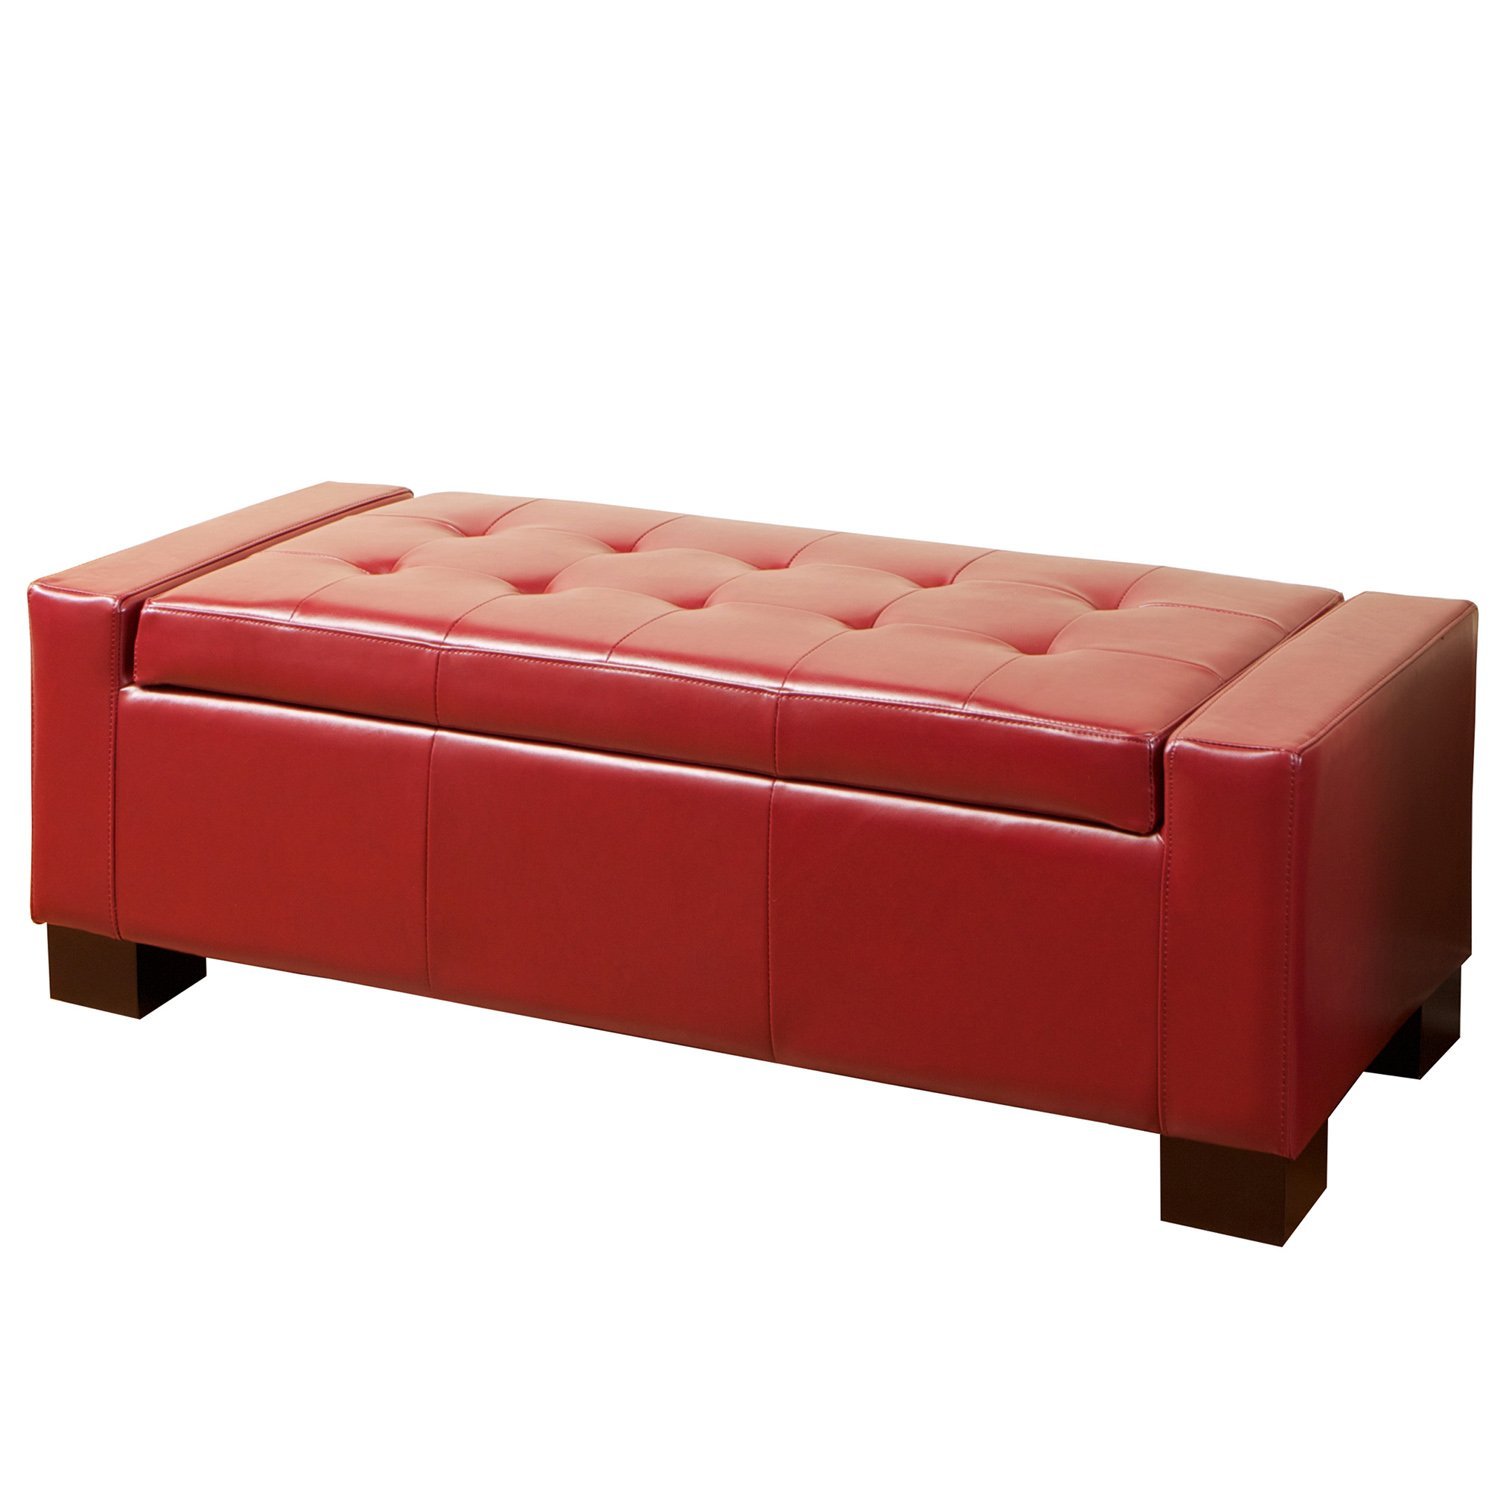 Best Selling Guernsey Leather Storage Ottoman Red 